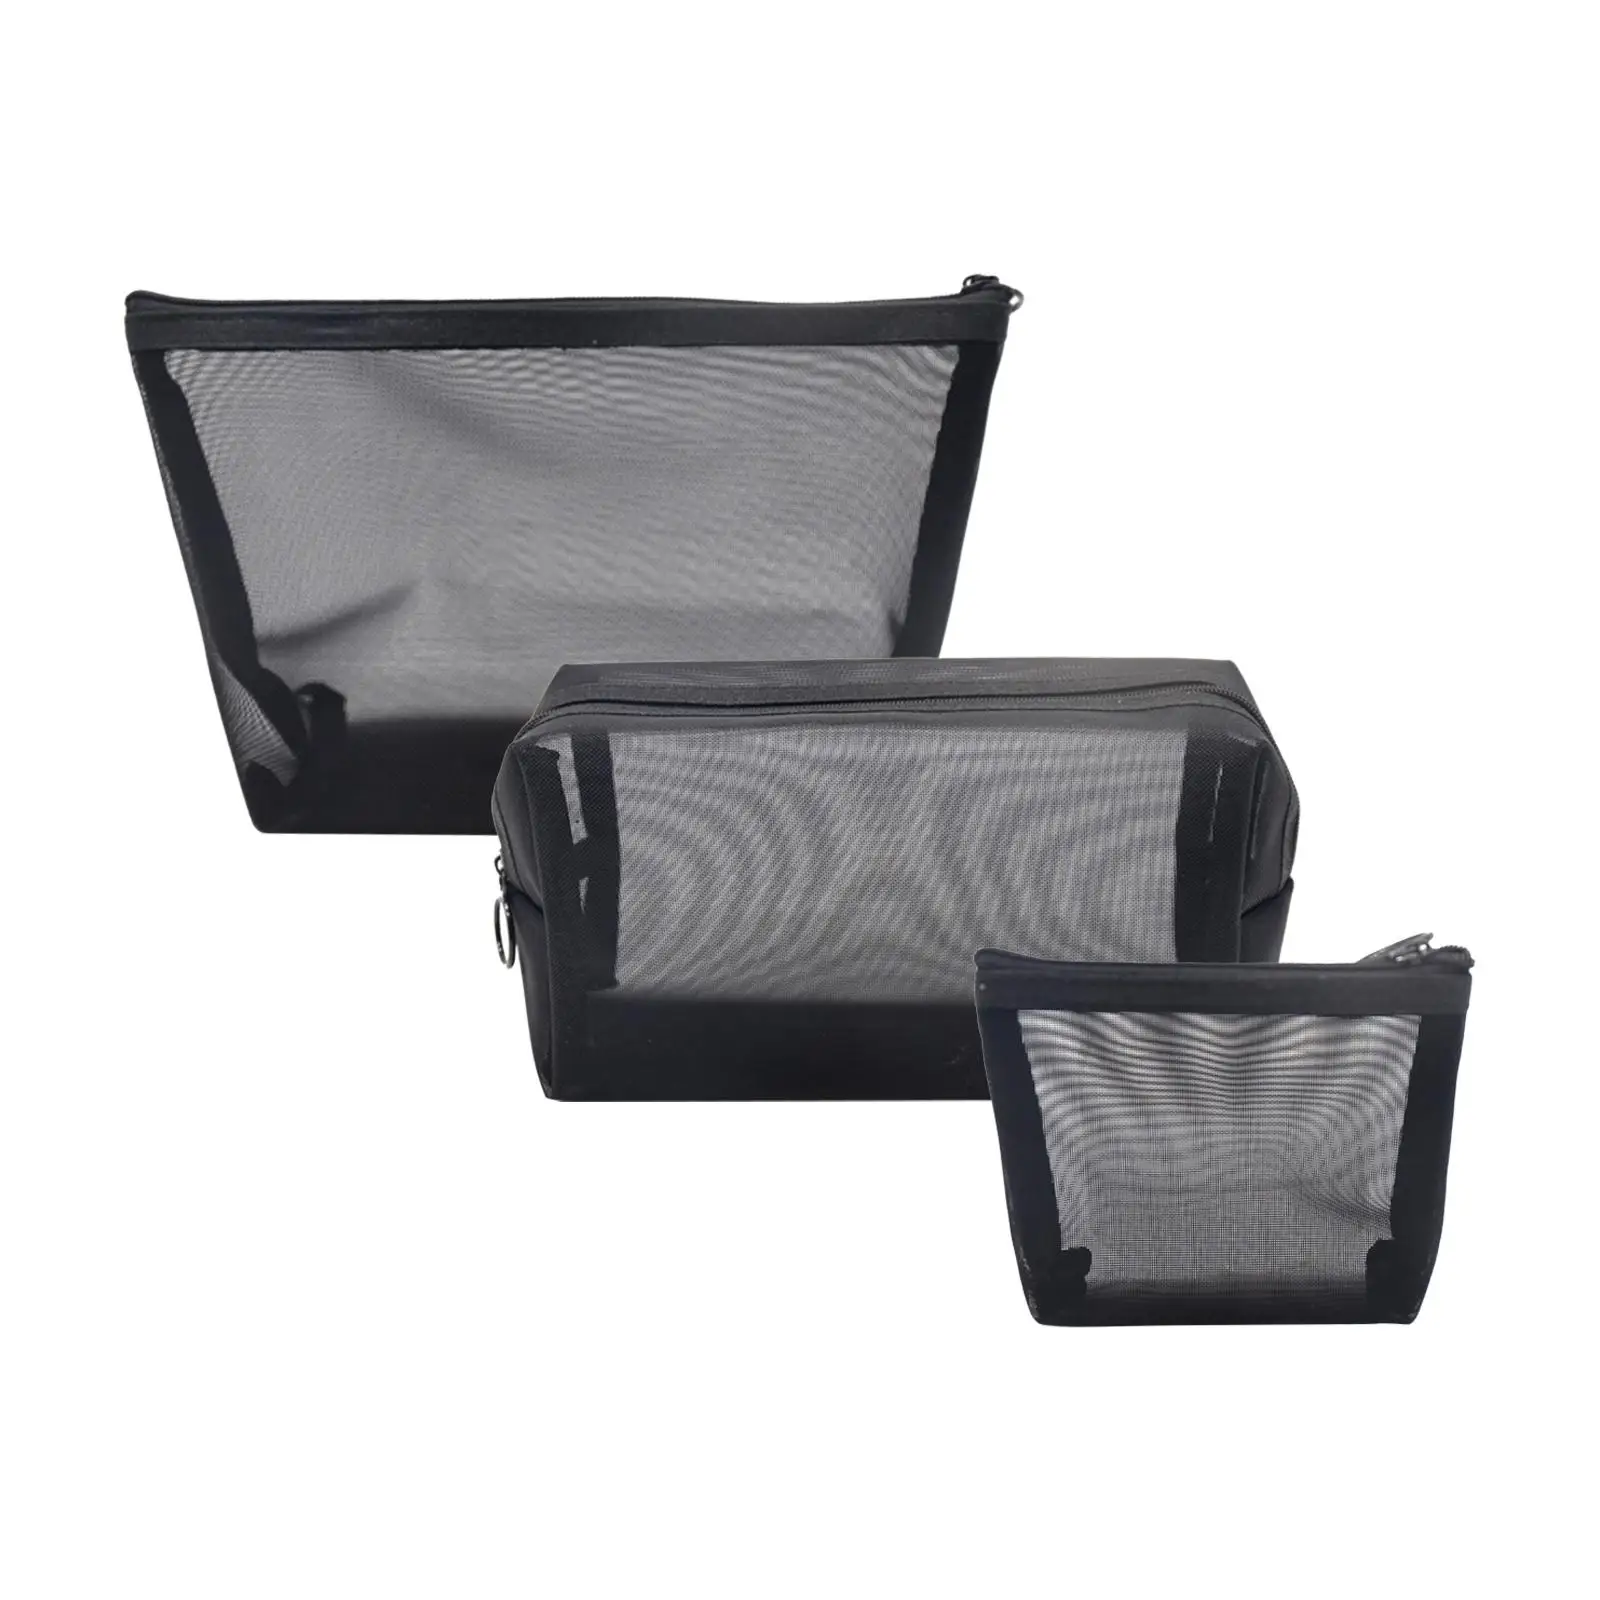 3 Pieces Mesh Travel Makeup Bags Large Opening Multifunctional Cosmetic Pouch for Business Trip Cosmetics Traveling Toiletries